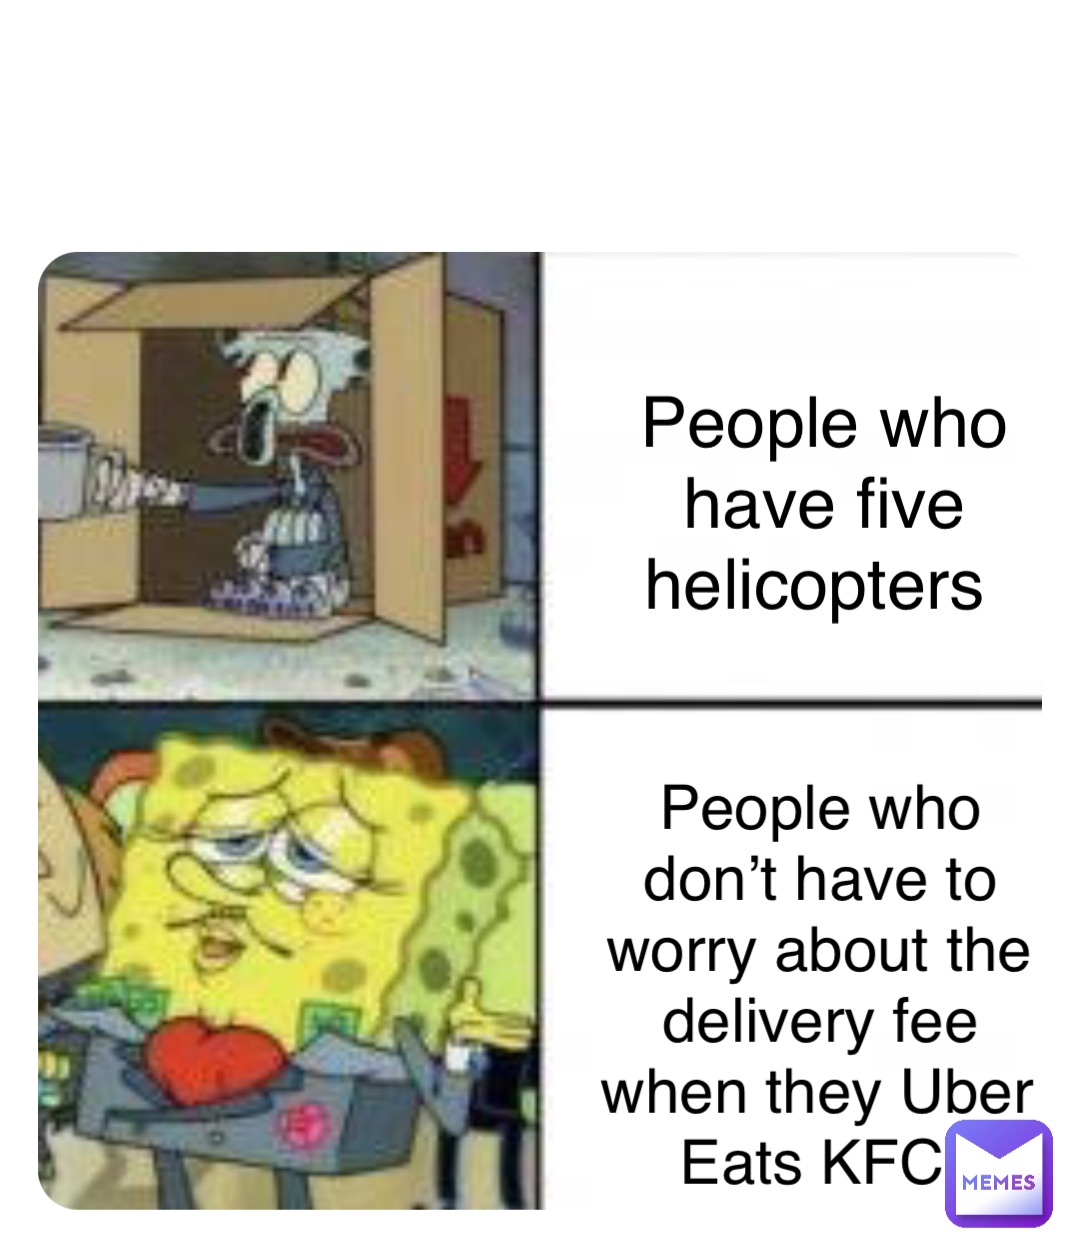 Double tap to edit People who have five helicopters People who don’t have to worry about the delivery fee when they Uber Eats KFC